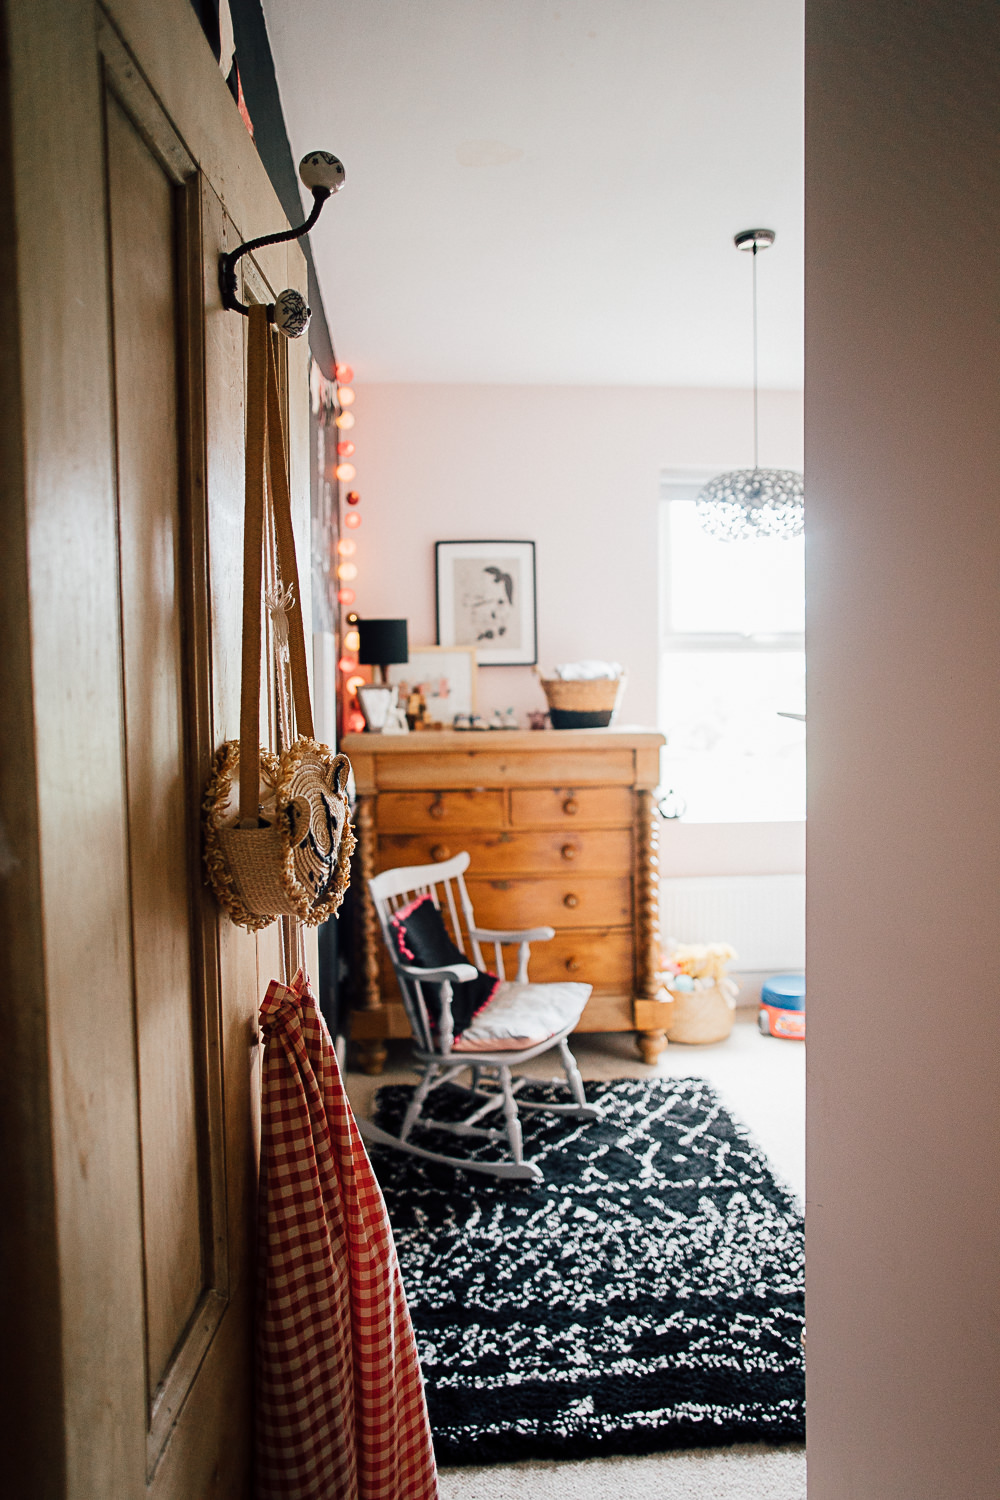 Characterful kids room with vintage furniture